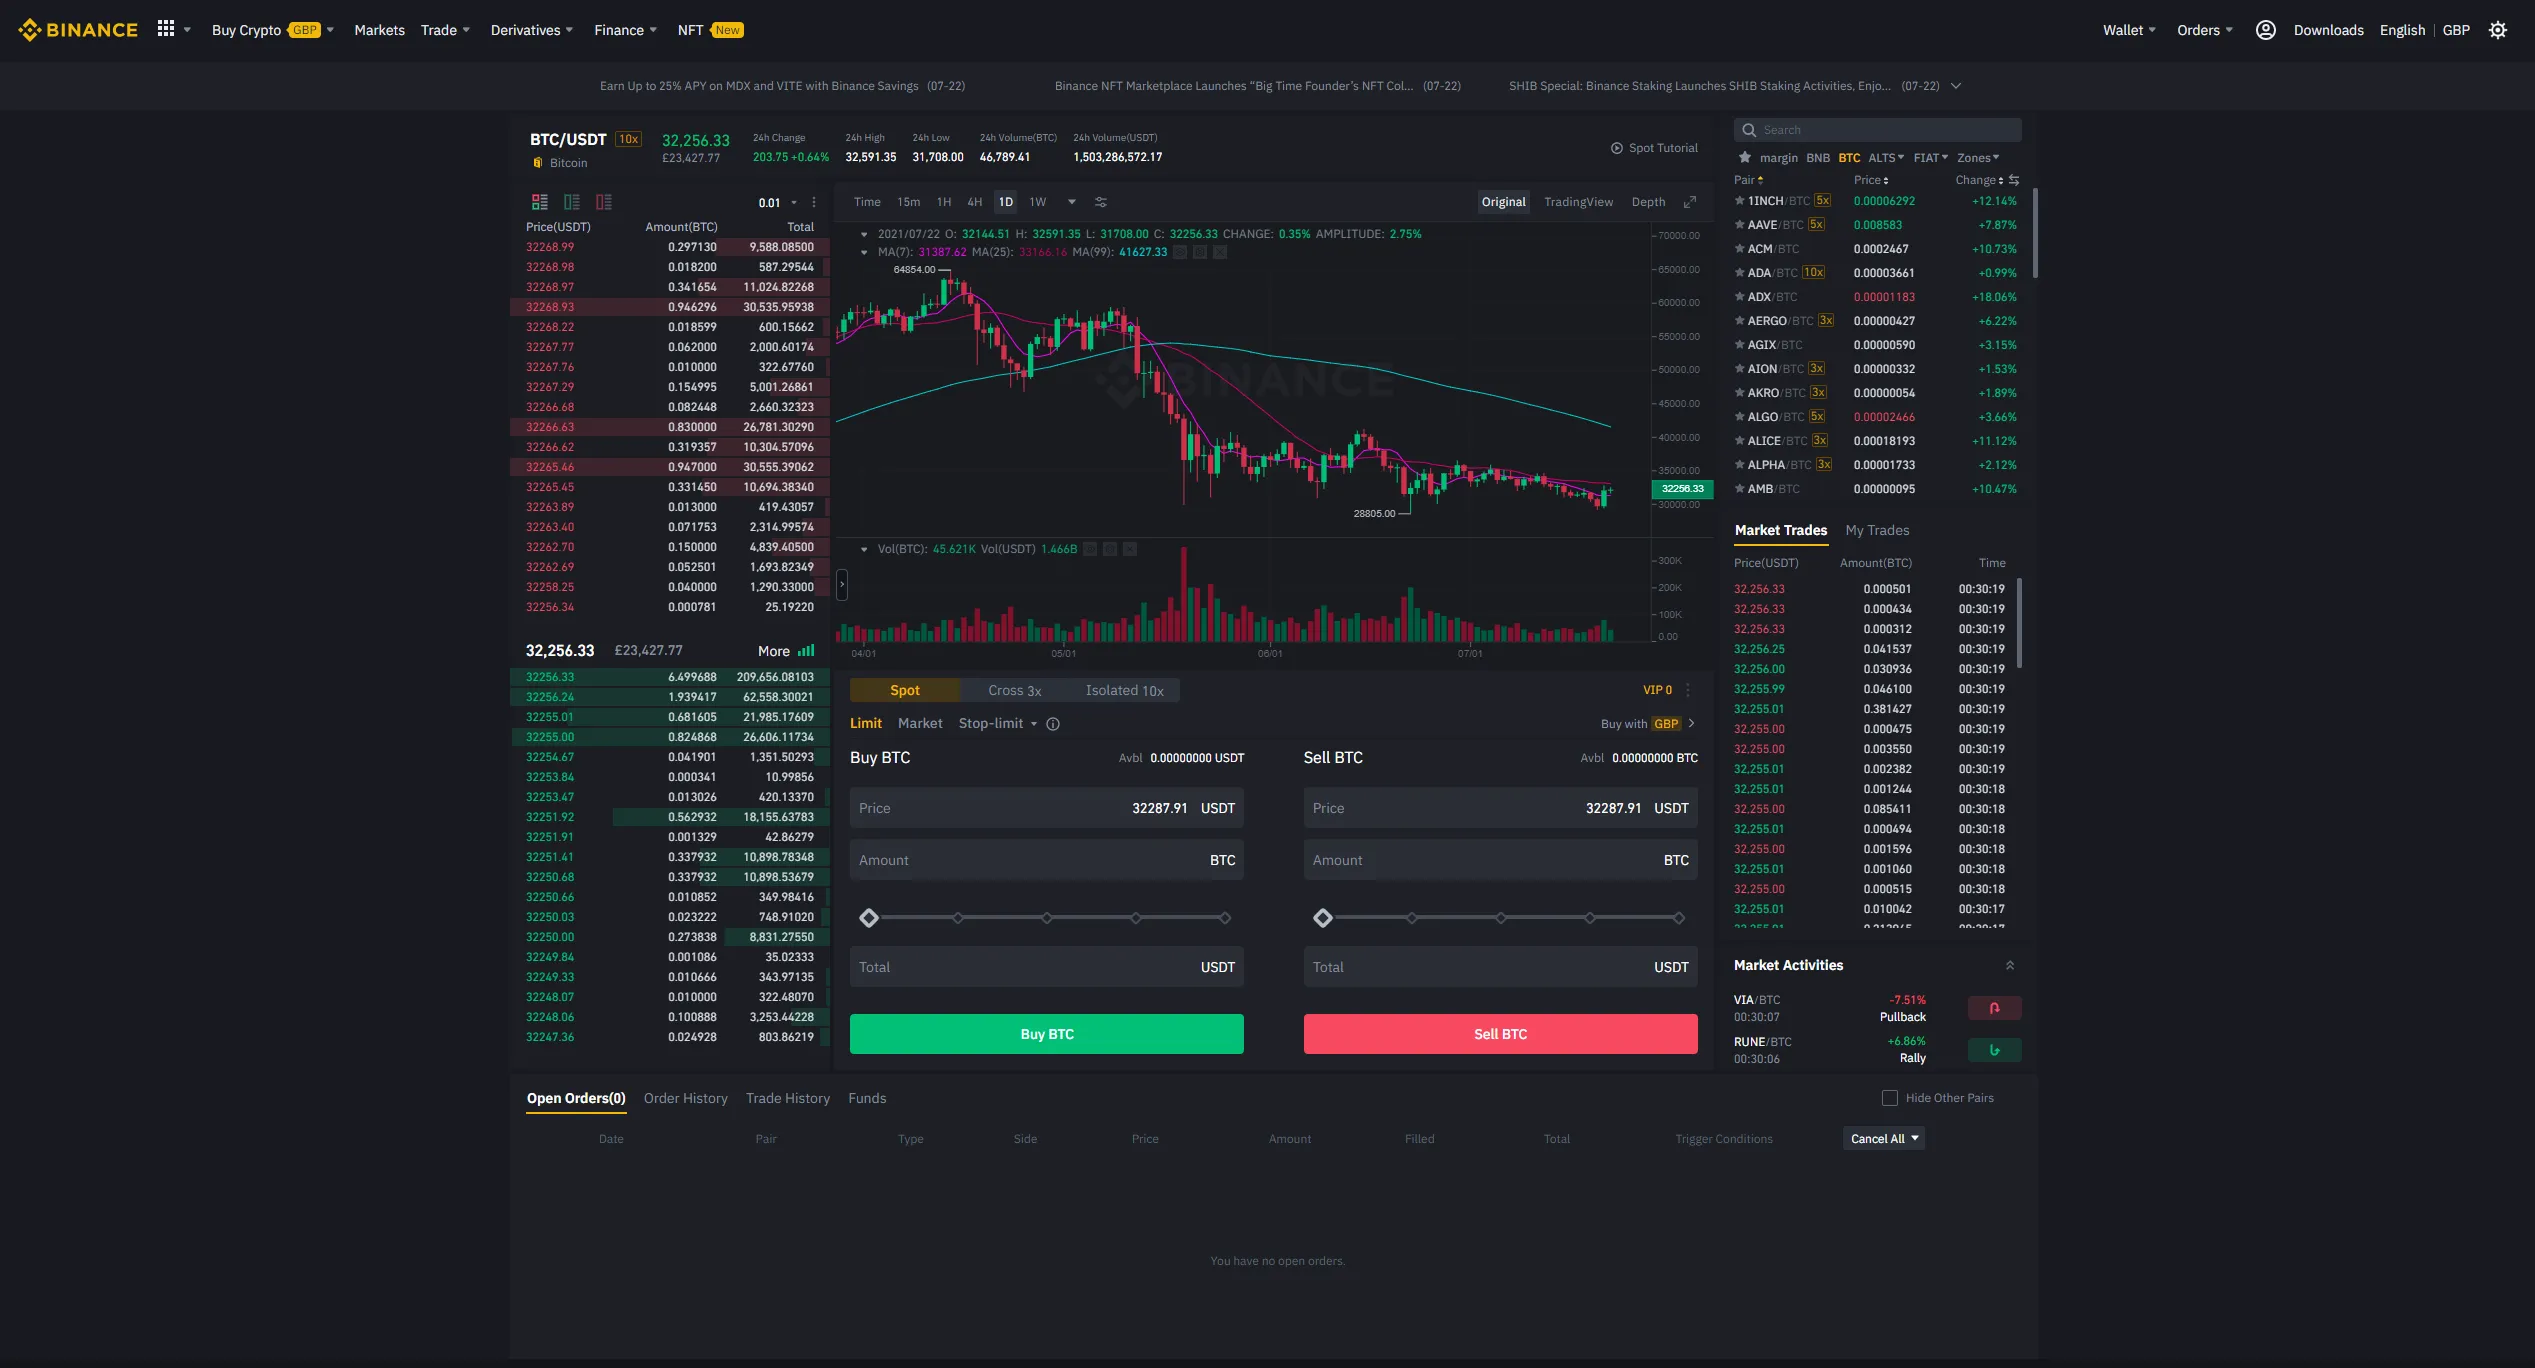 Binance review: all you need to know [] - Blockchains Expert